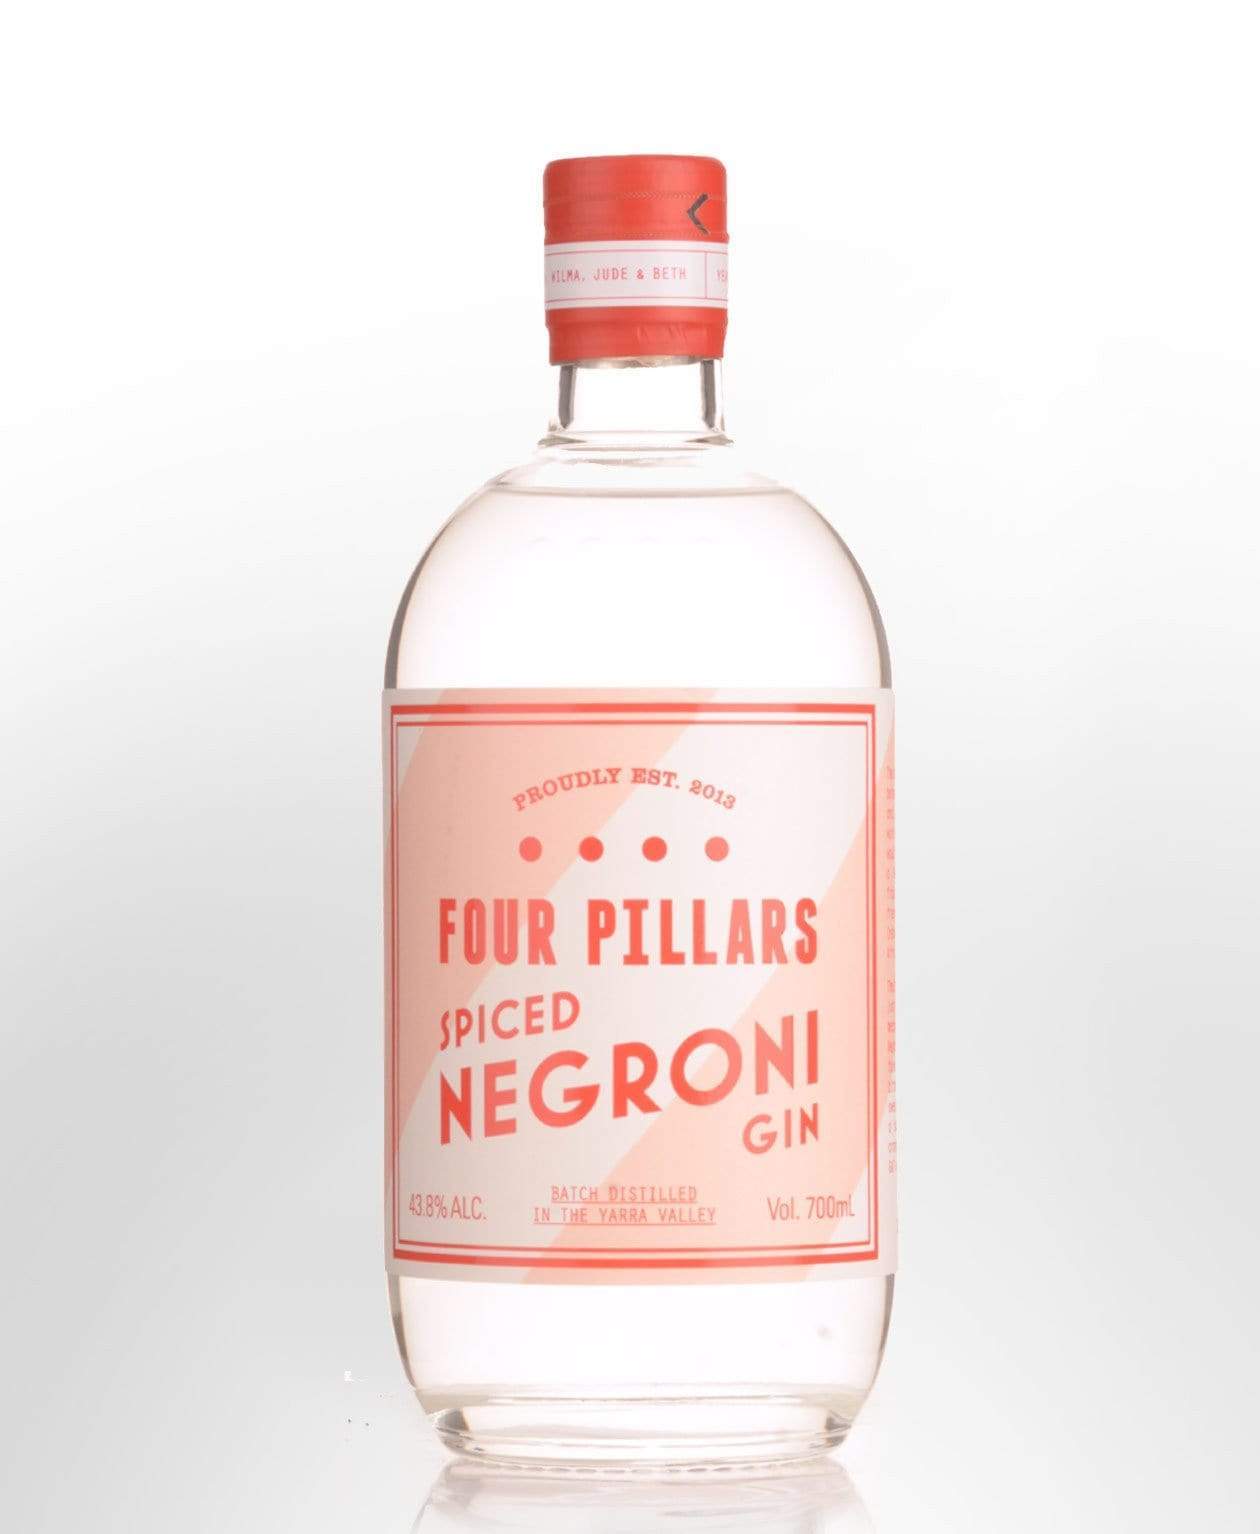 Personalised Four Pillars Spiced Negroni Gin 43.8% 700ml